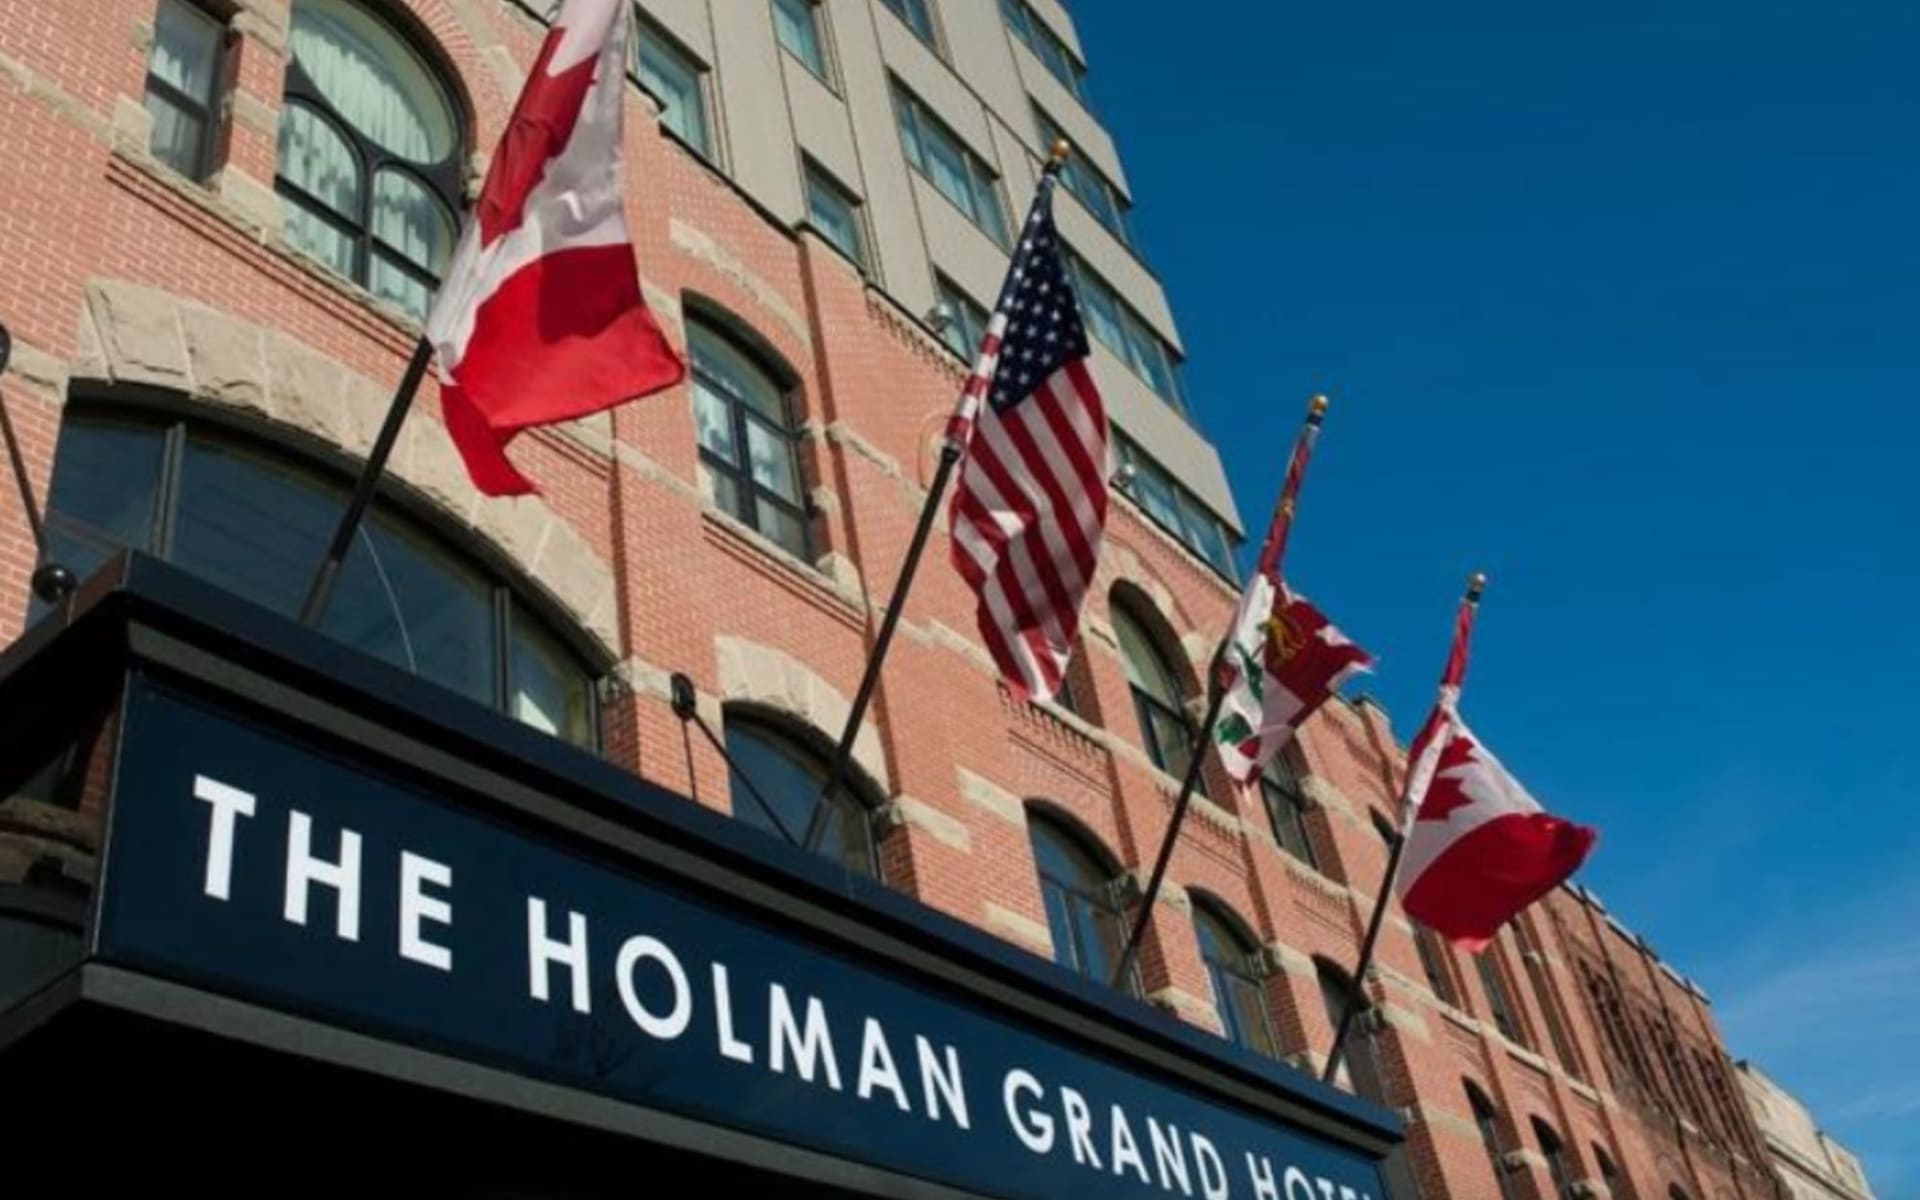 The Holman Grand Hotel in Charlottetown:  exterior_The Holman Grand Hotel_Front